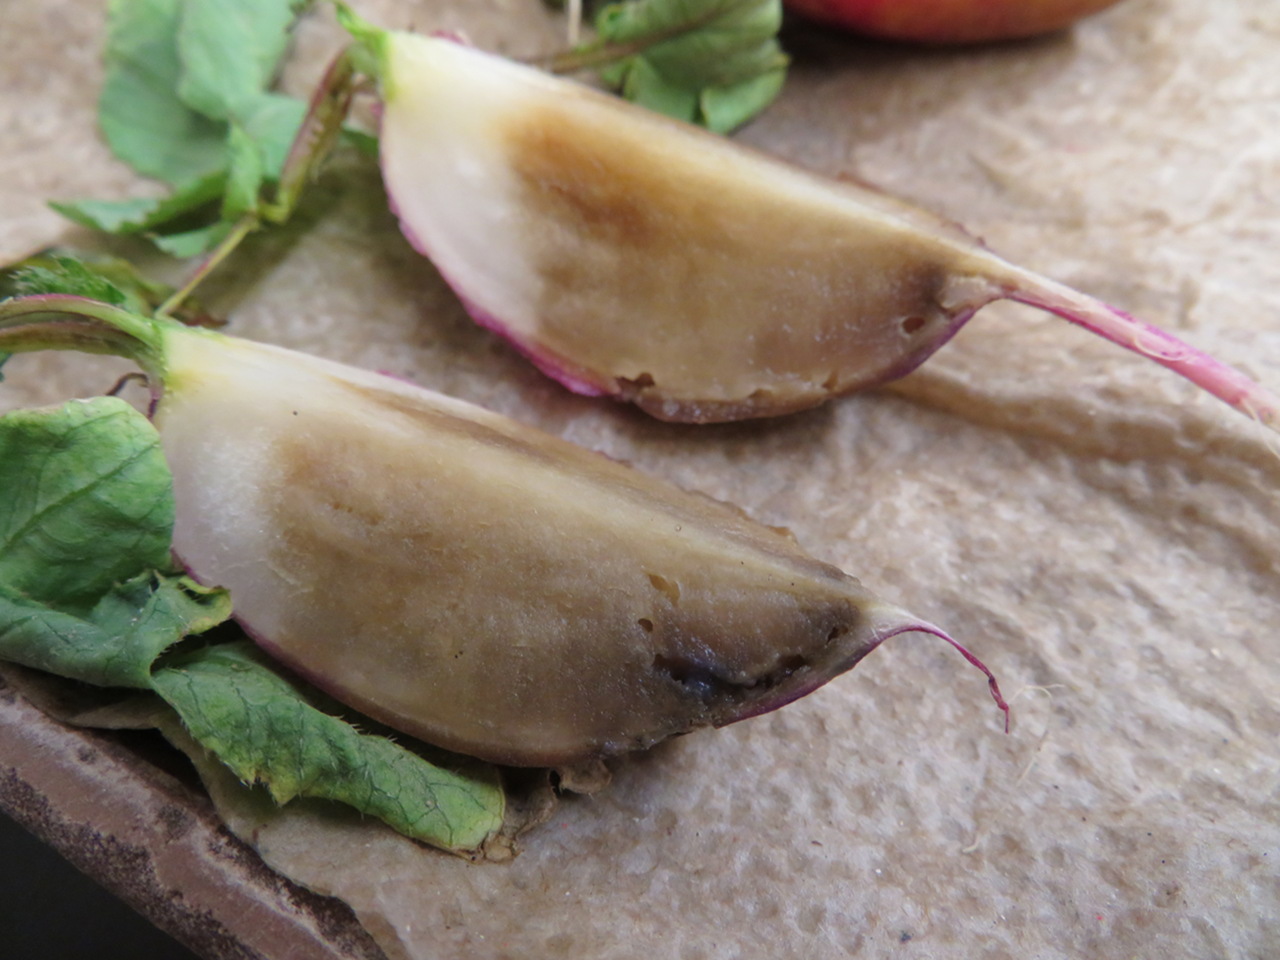 Small holes where the cabbage maggot fed and tunneled inside a radish root, followed by colonization of the wound sites by soft rot bacteria that caused the lower 75% of the root to discolor and rot.